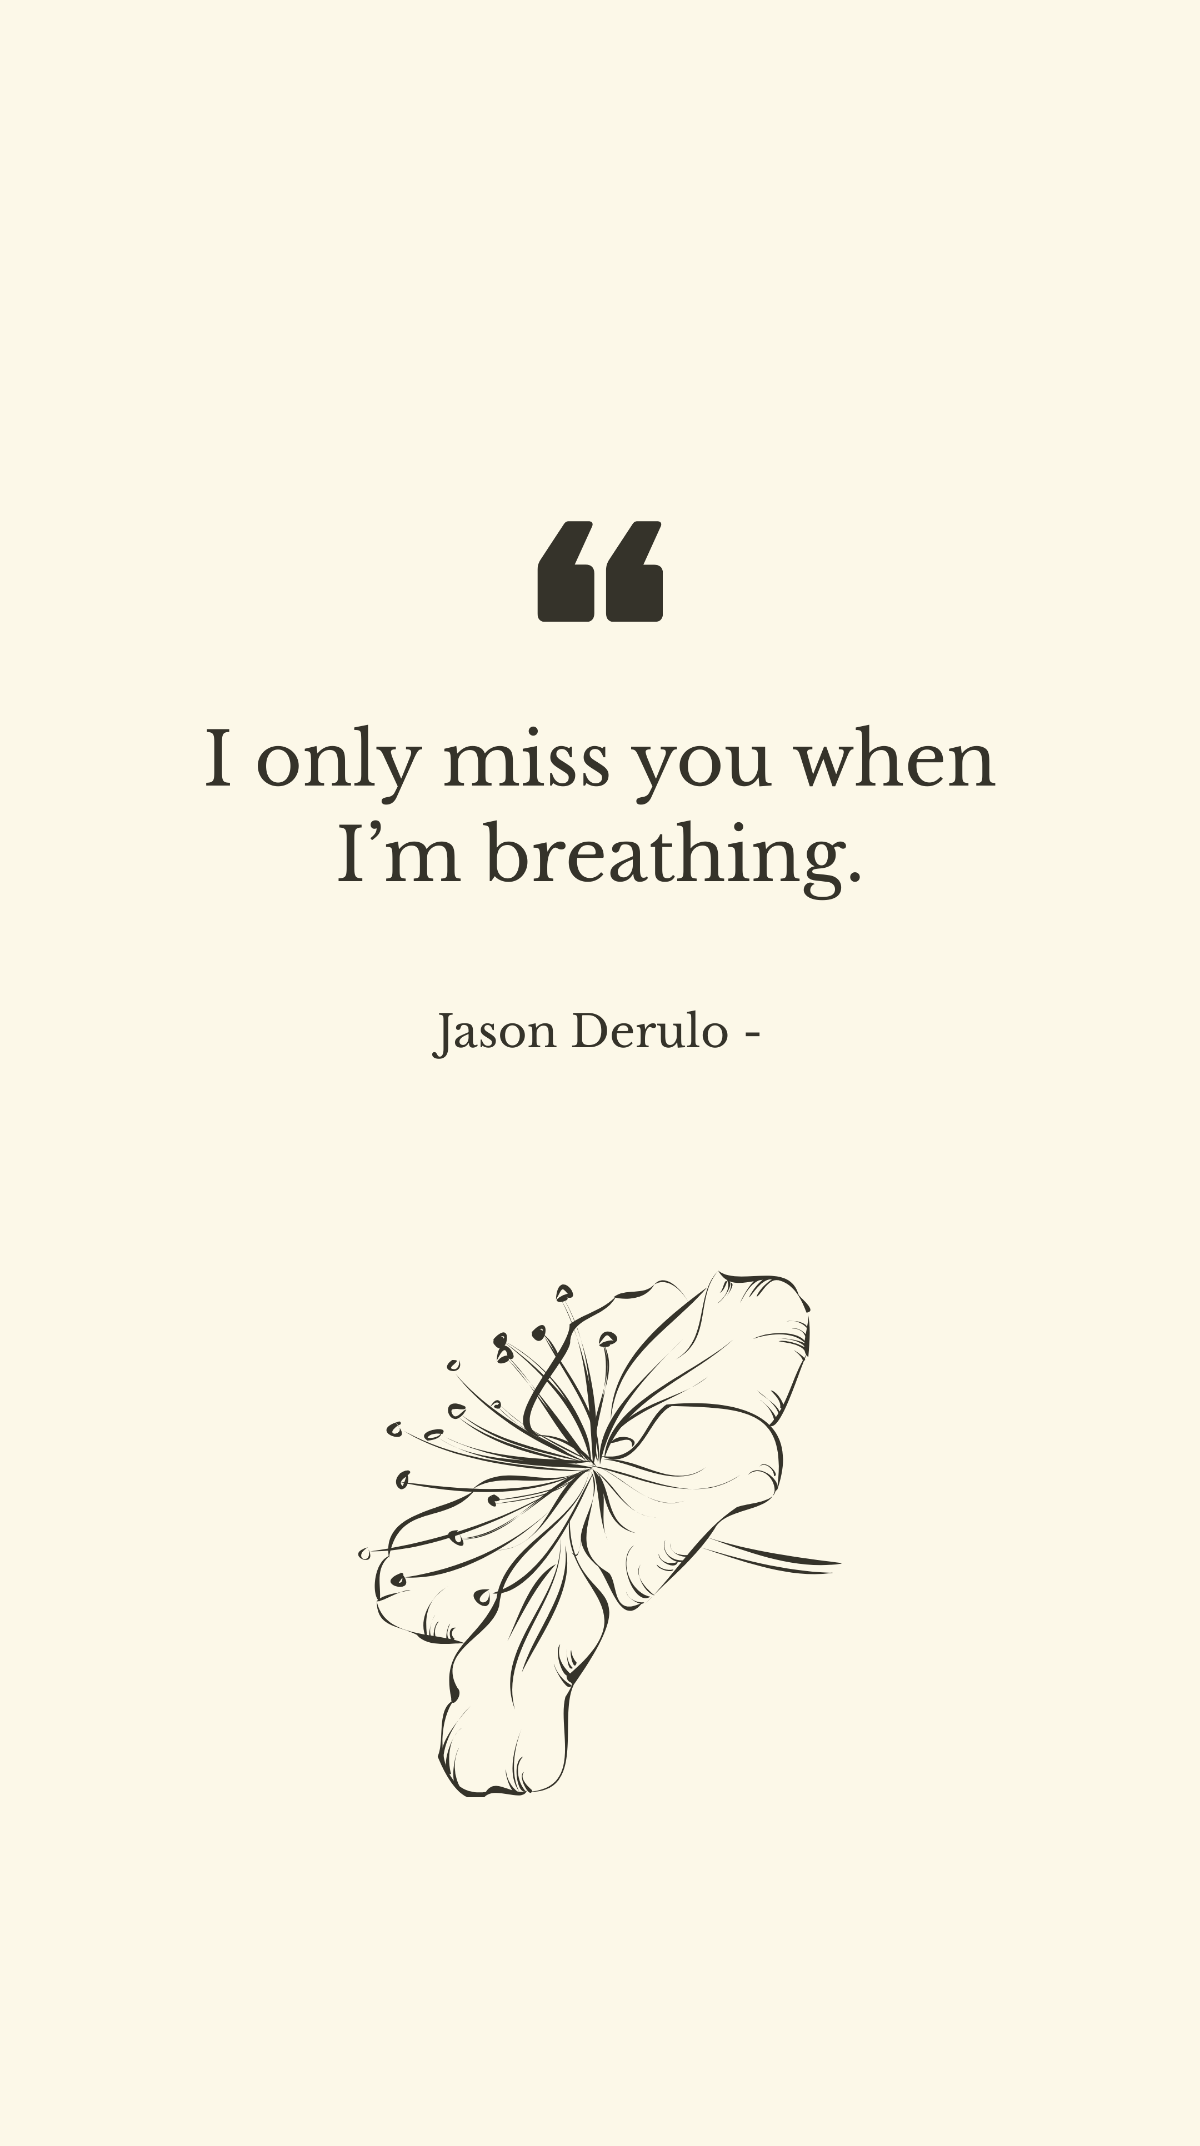 Jason Derulo - I only miss you when I’m breathing. Template